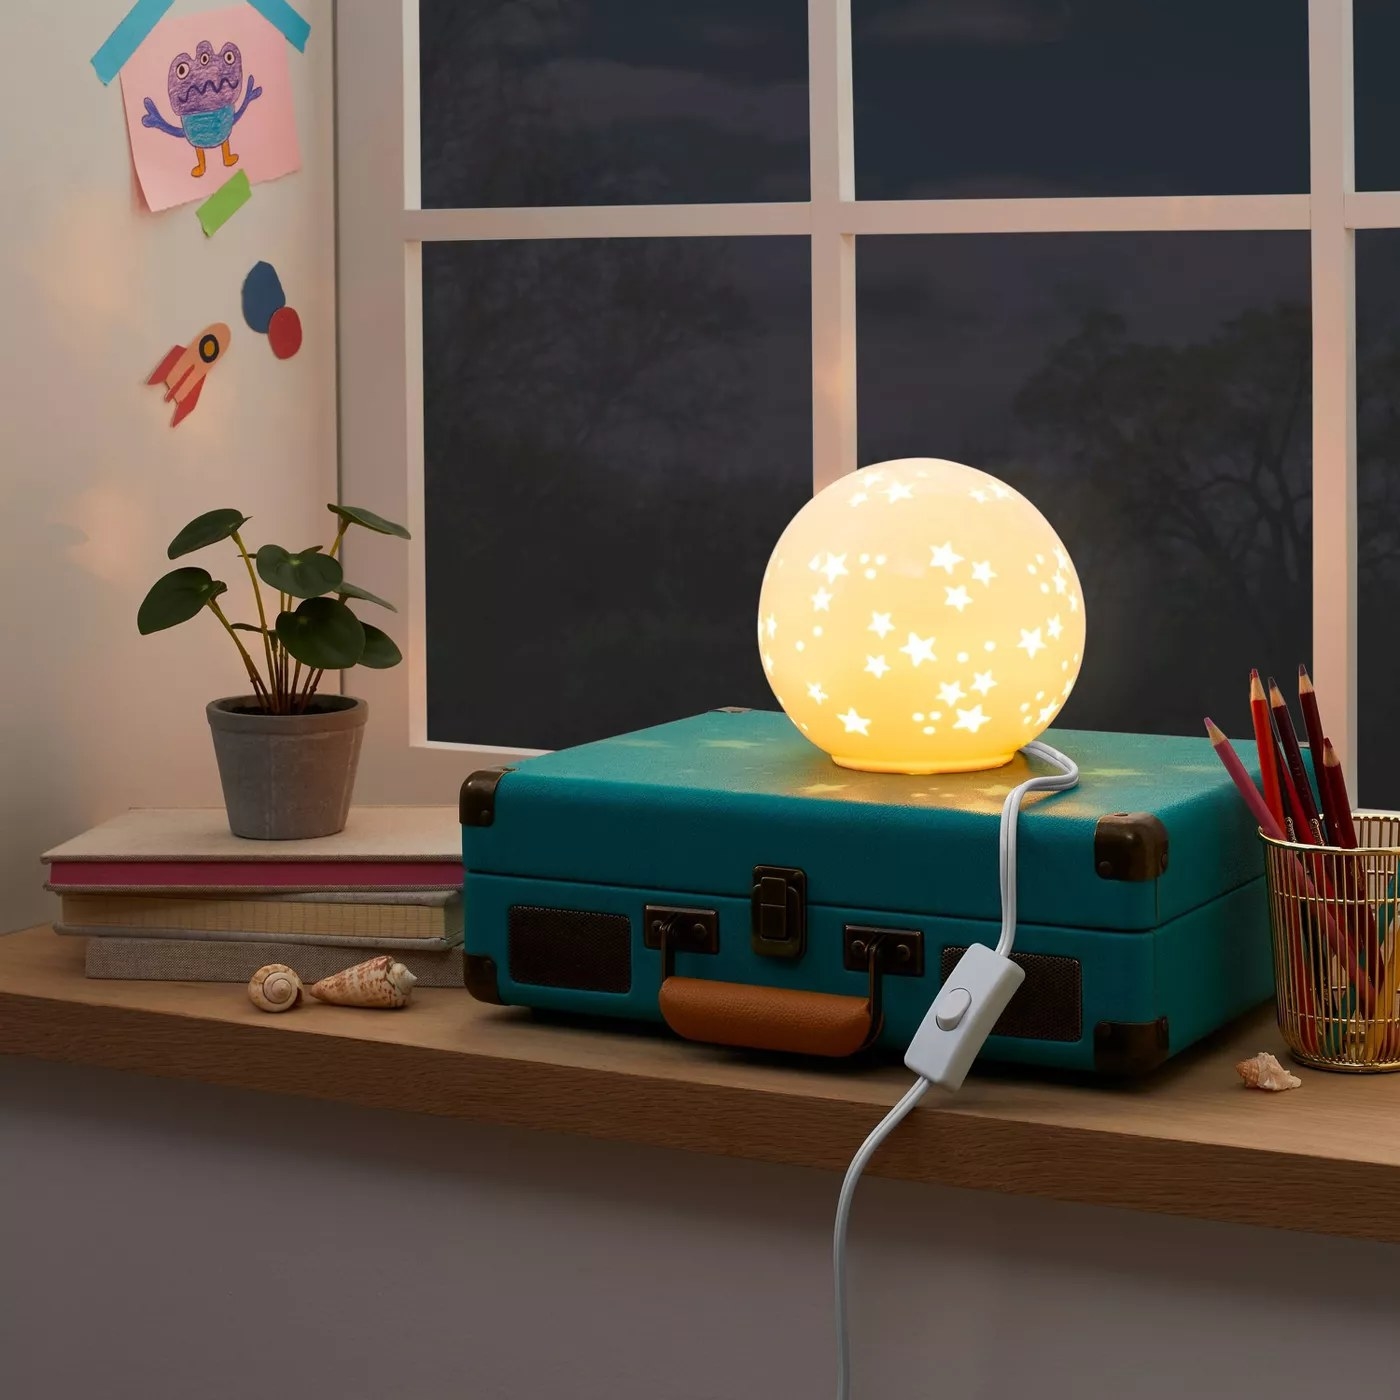 The nightlight with a star pattern illuminated in a child&#x27;s room